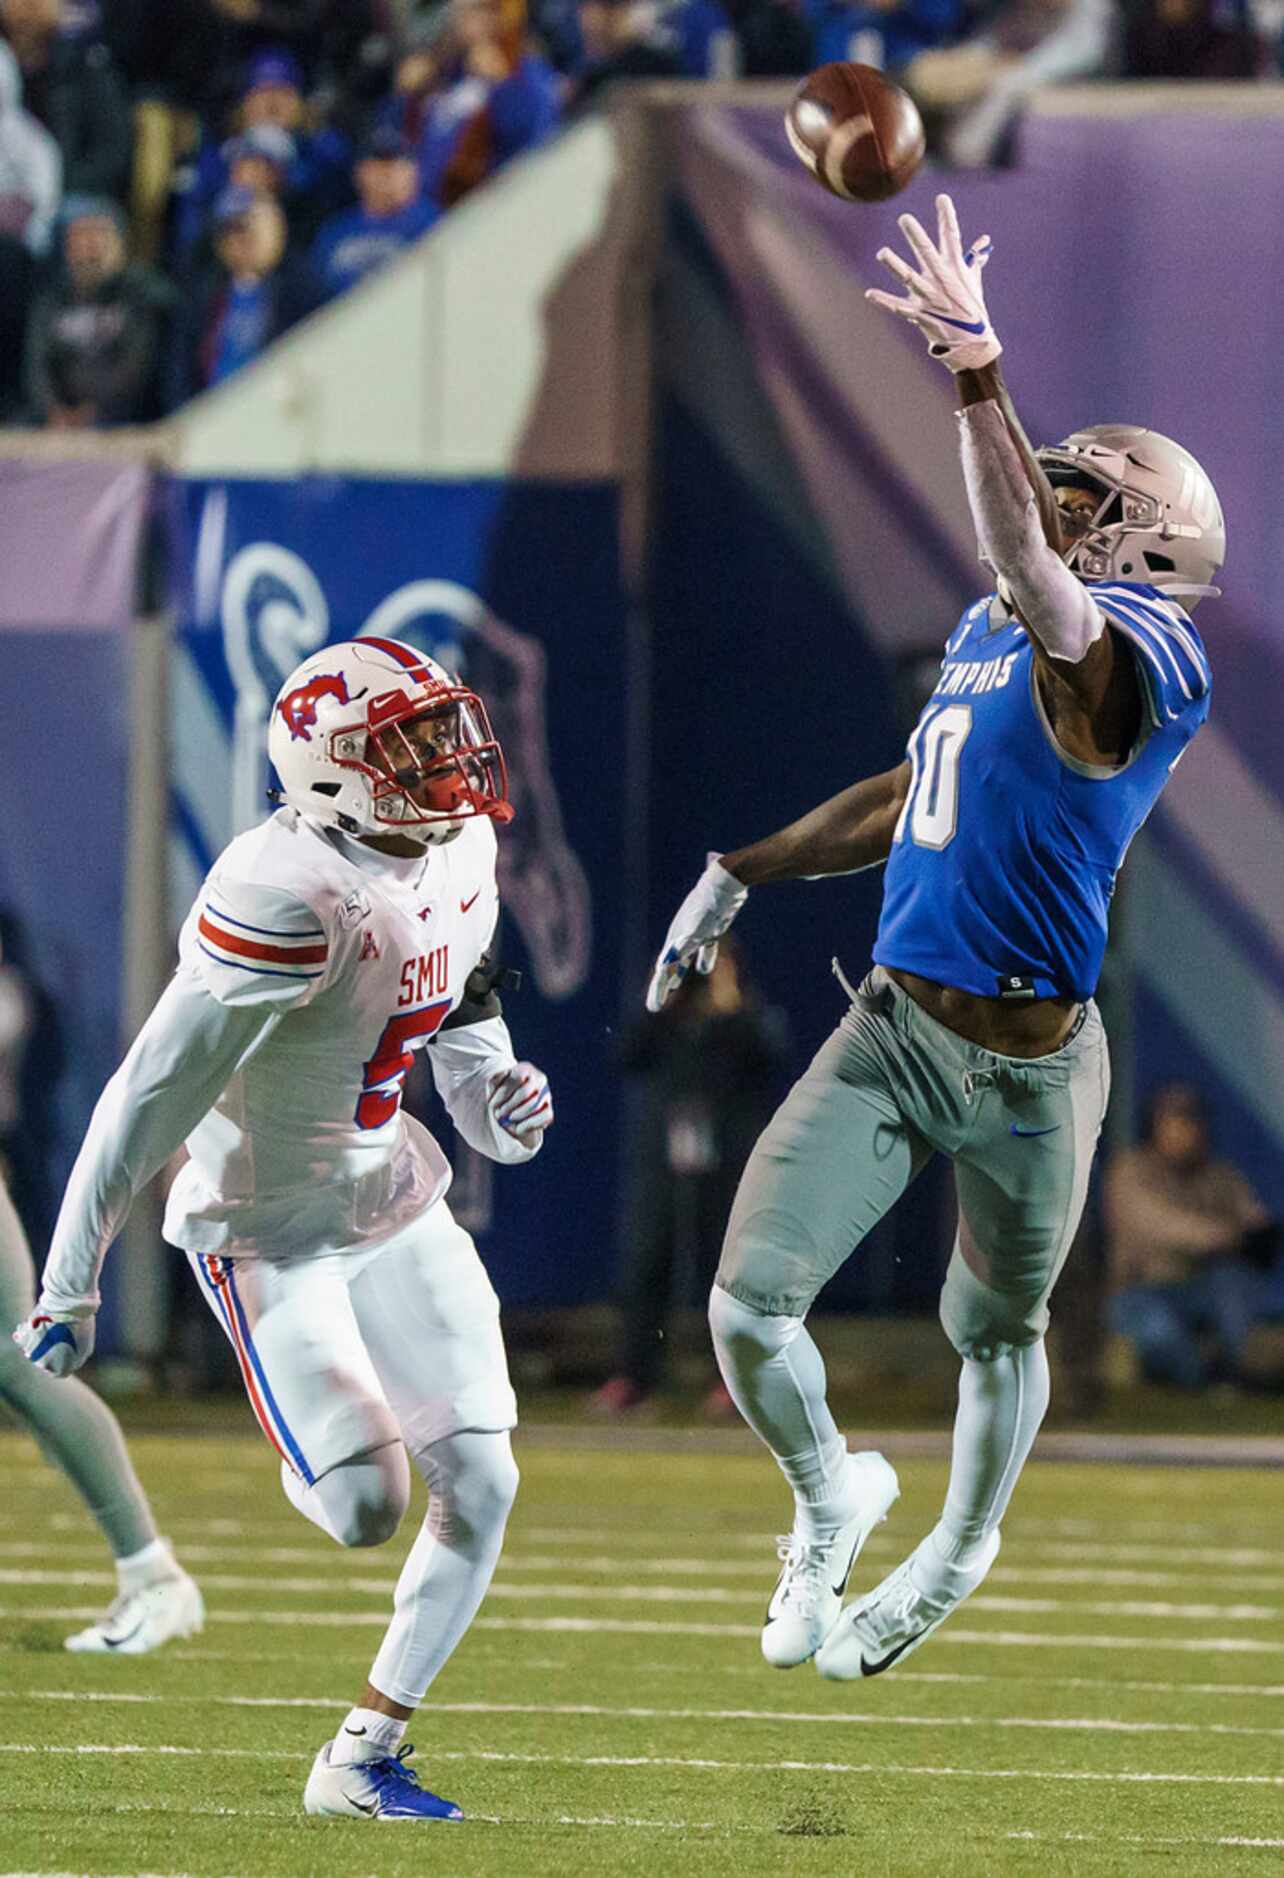 Memphis wide receiver Damonte Coxie (10) makes a one-handed catch past SMU cornerback...